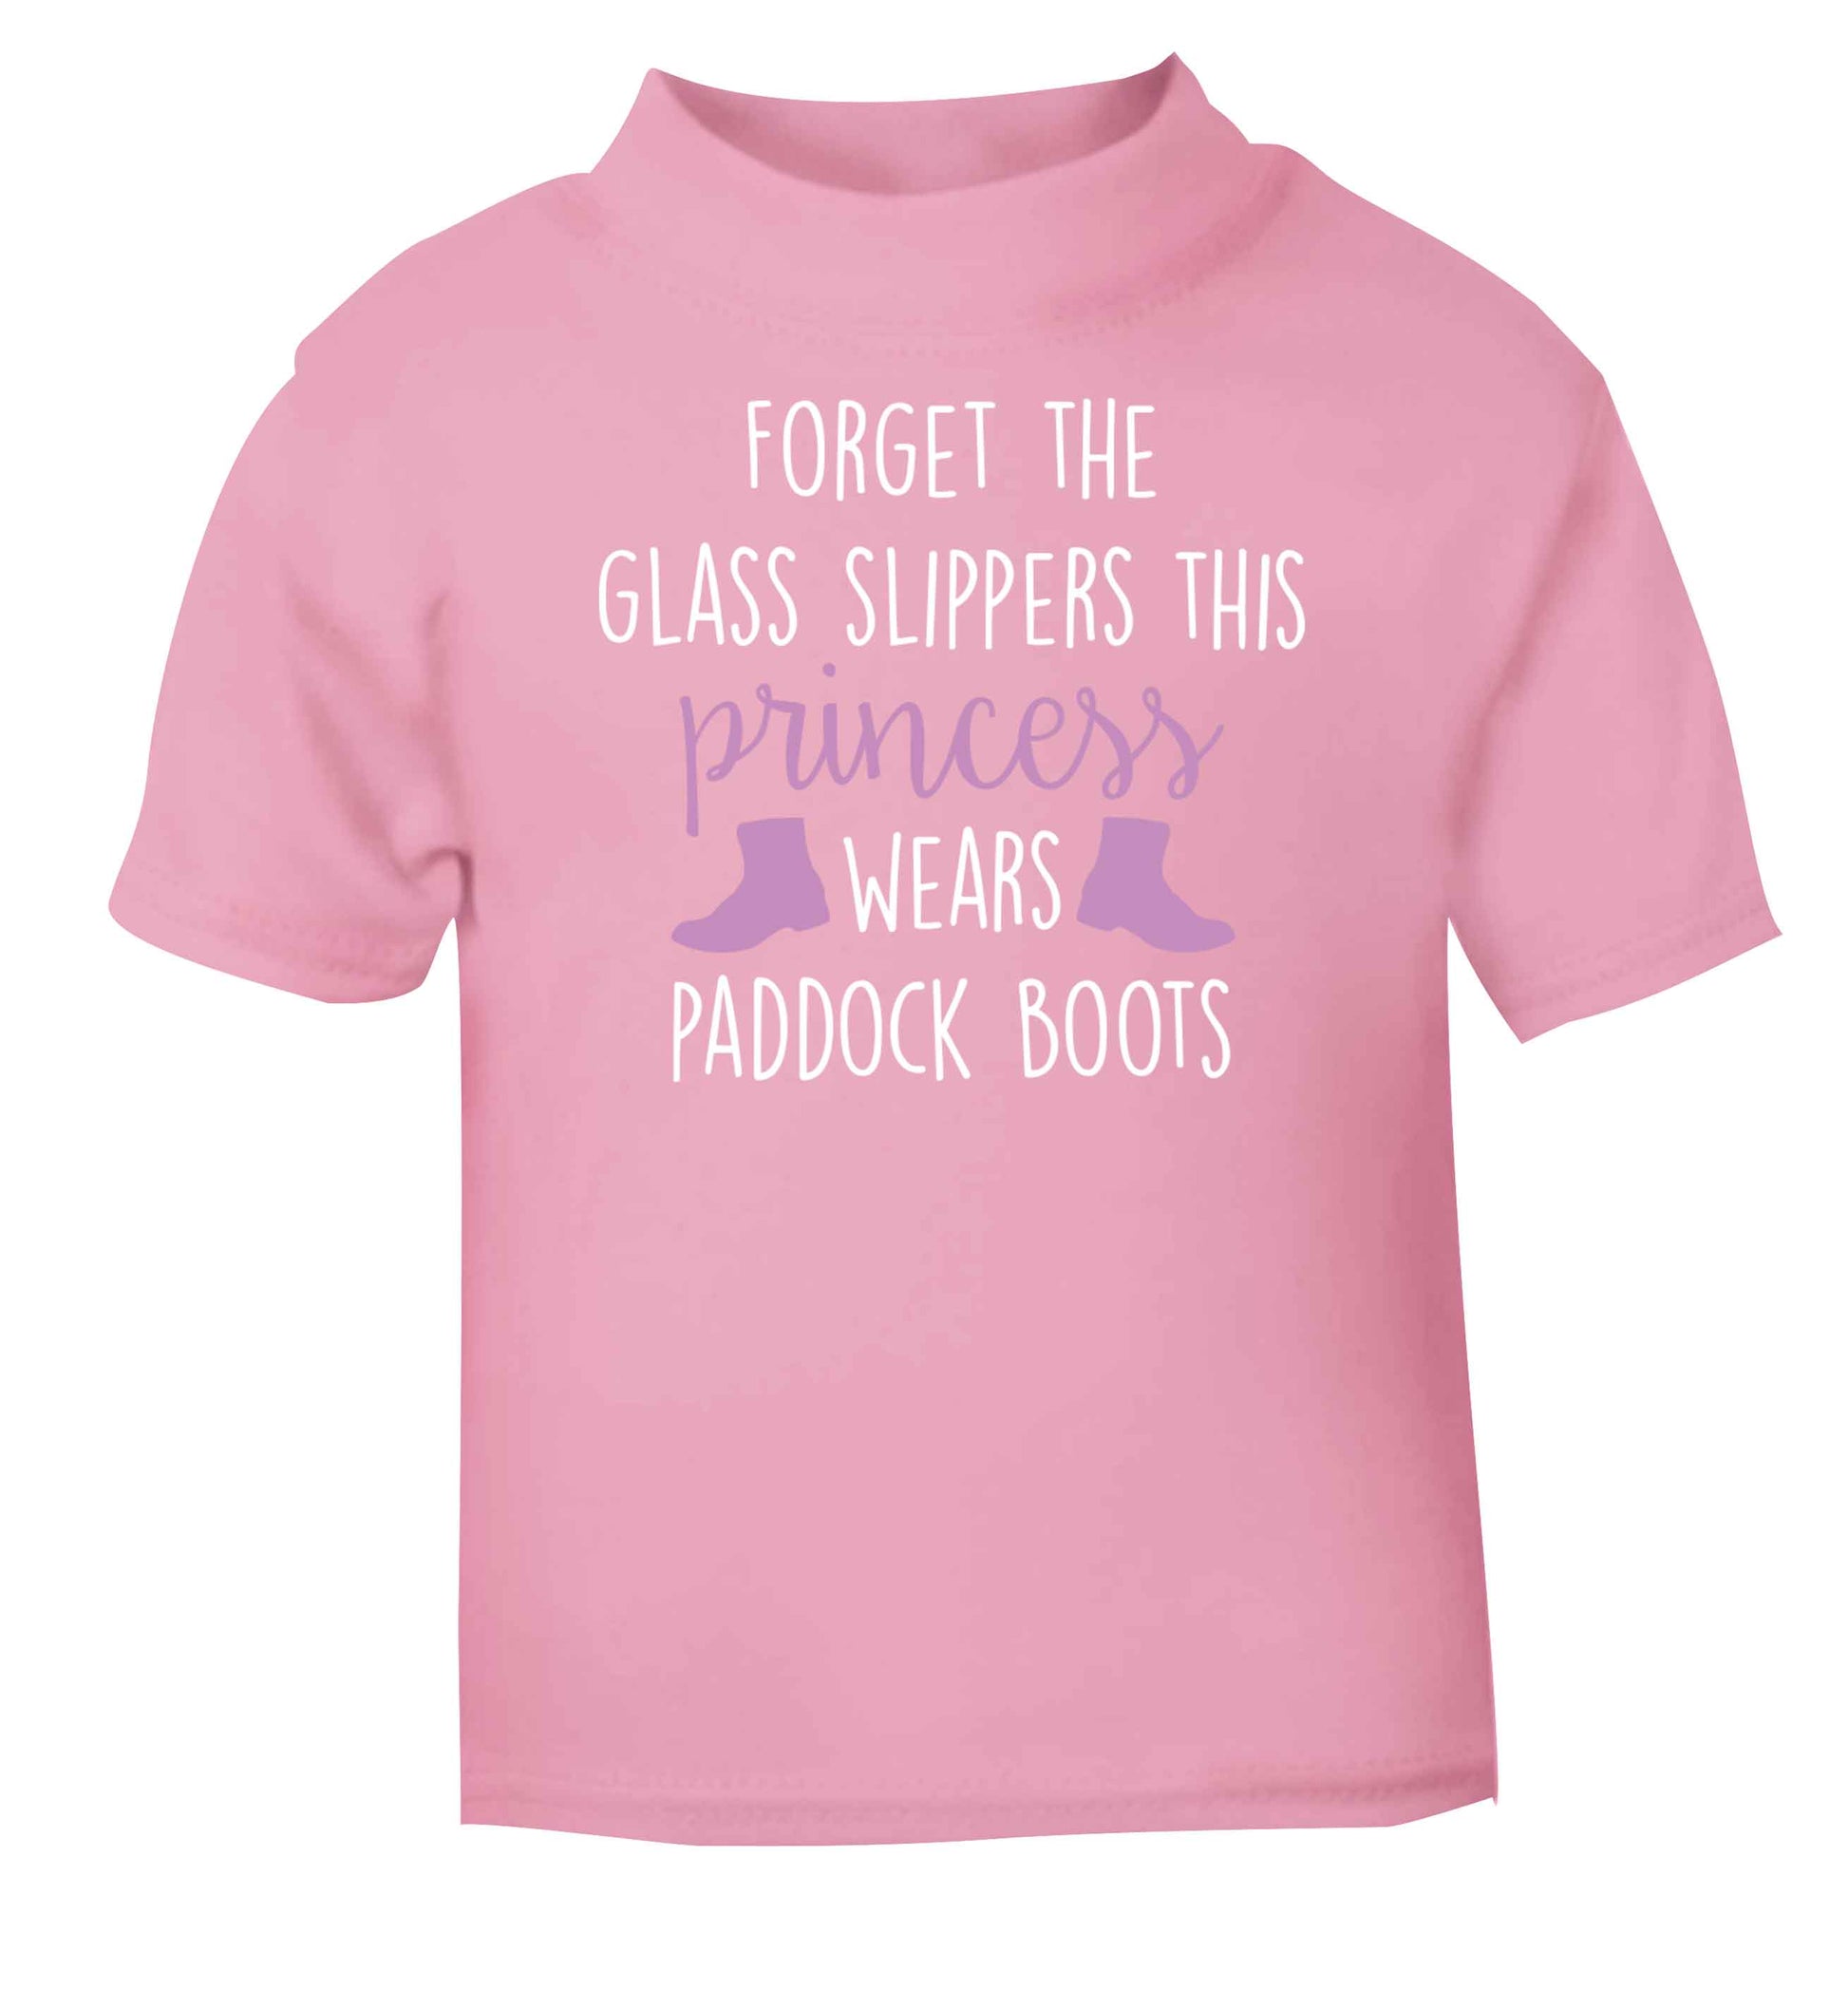 Forget the glass slippers this princess wears paddock boots light pink baby toddler Tshirt 2 Years